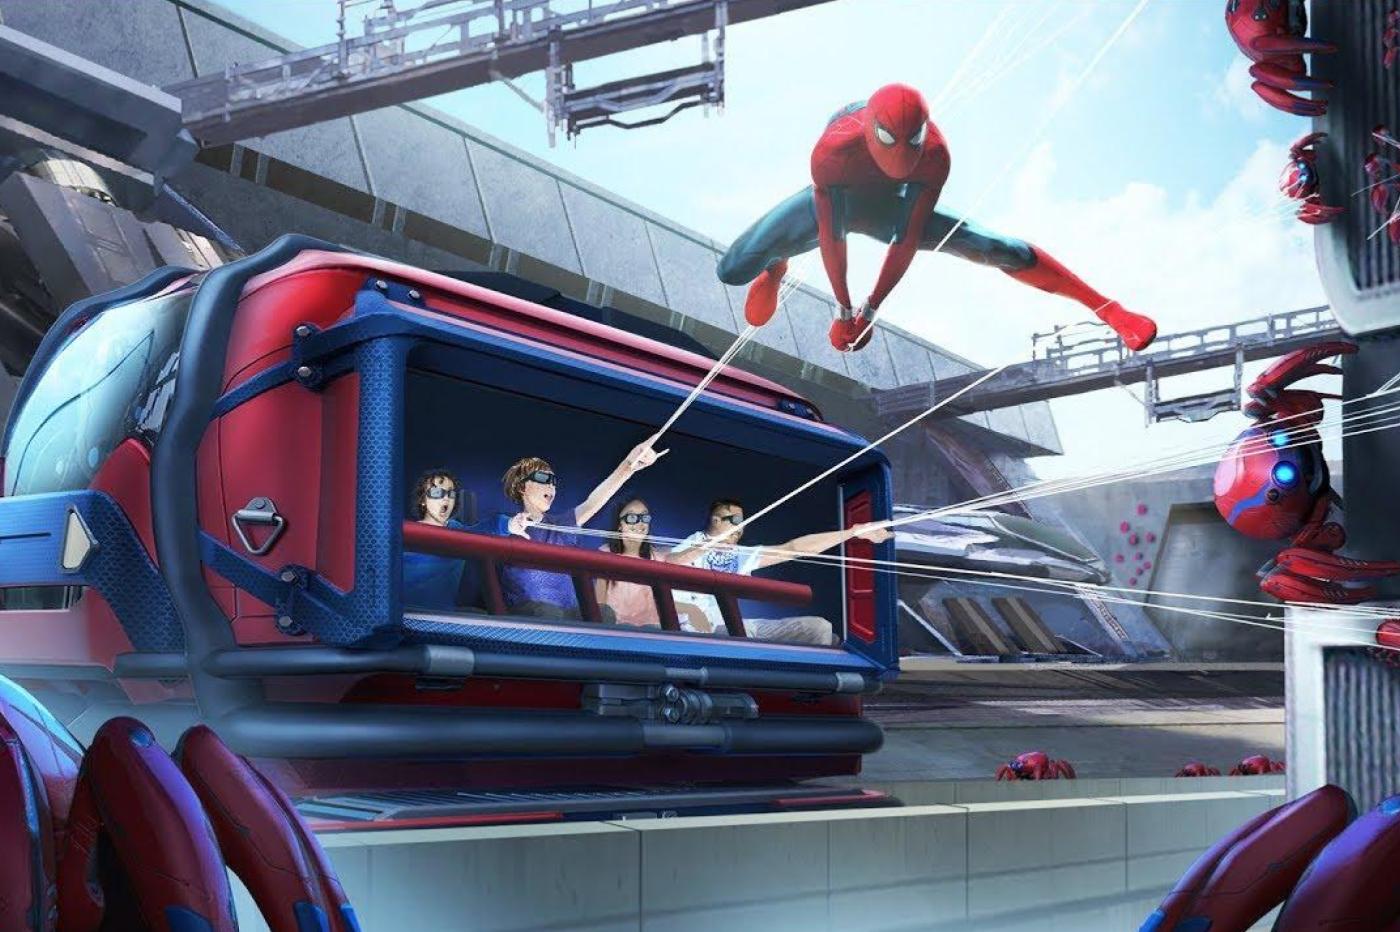 Concept Art of the Spiderman attraction showing passengers in the vehicle, shooting webs at robots with Spiderman